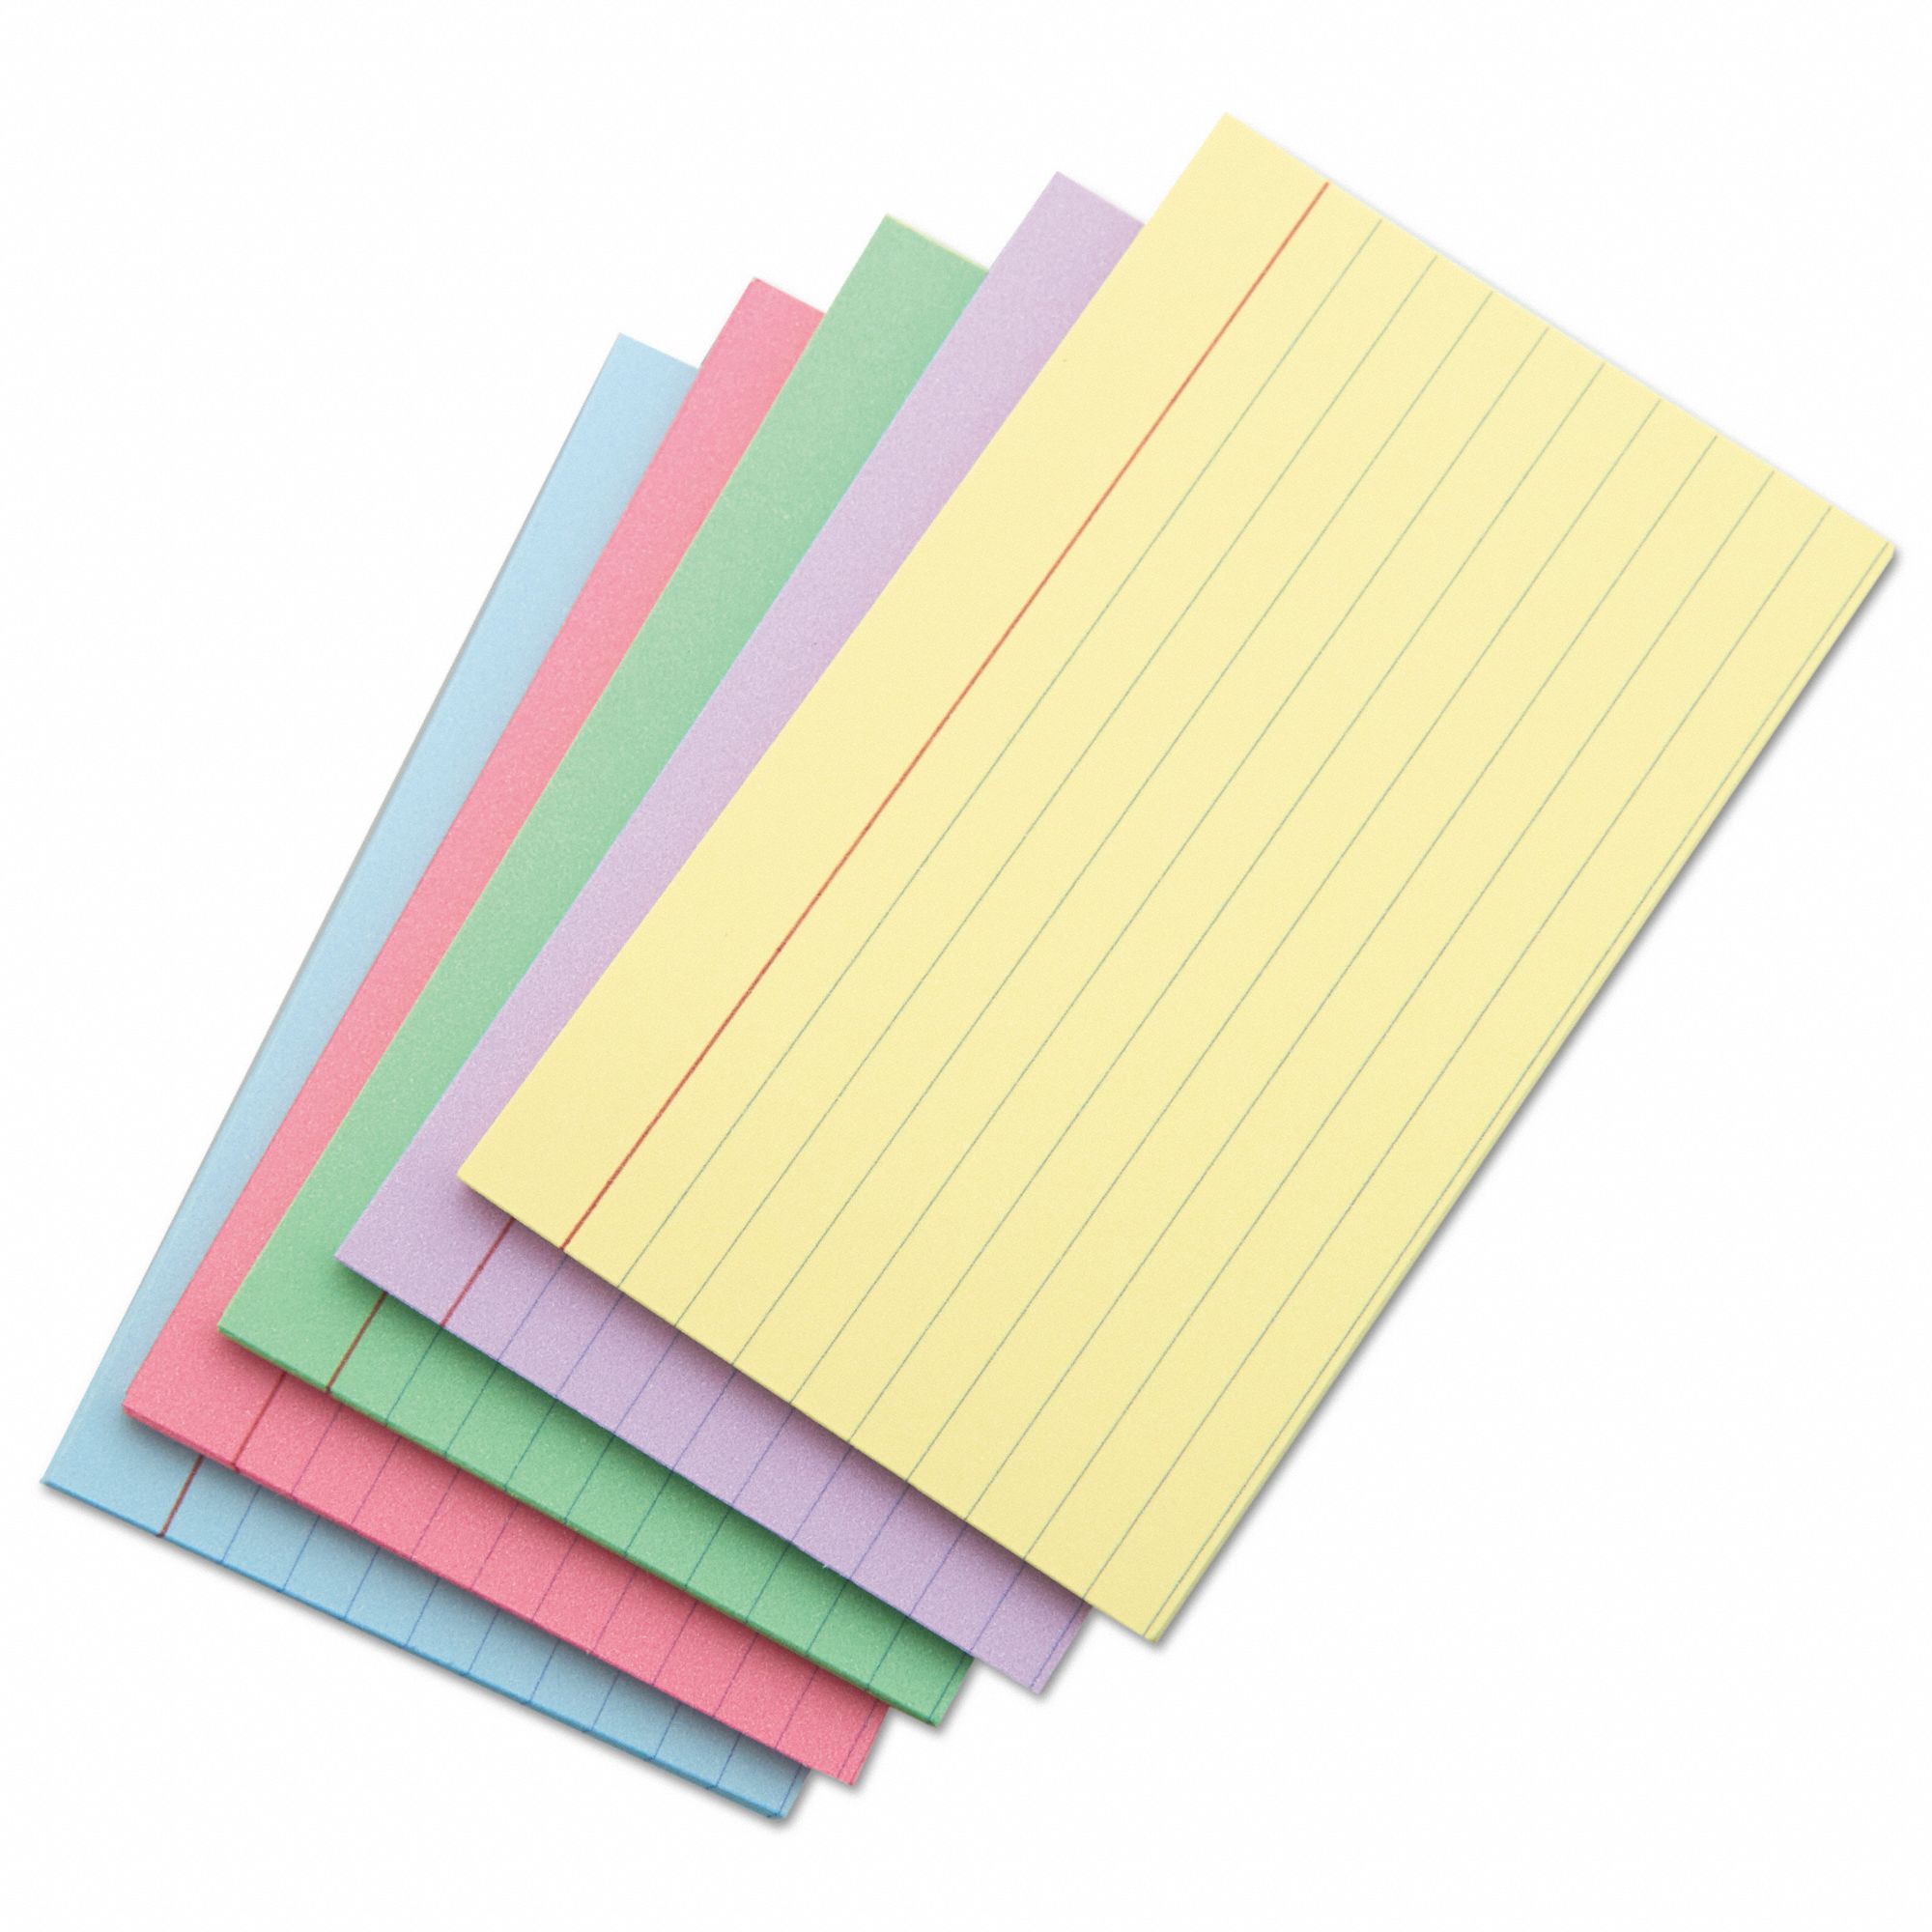 UNIVERSAL Index Cards: Ruled 5 in x 8 in Card Size Assorted 100 PK